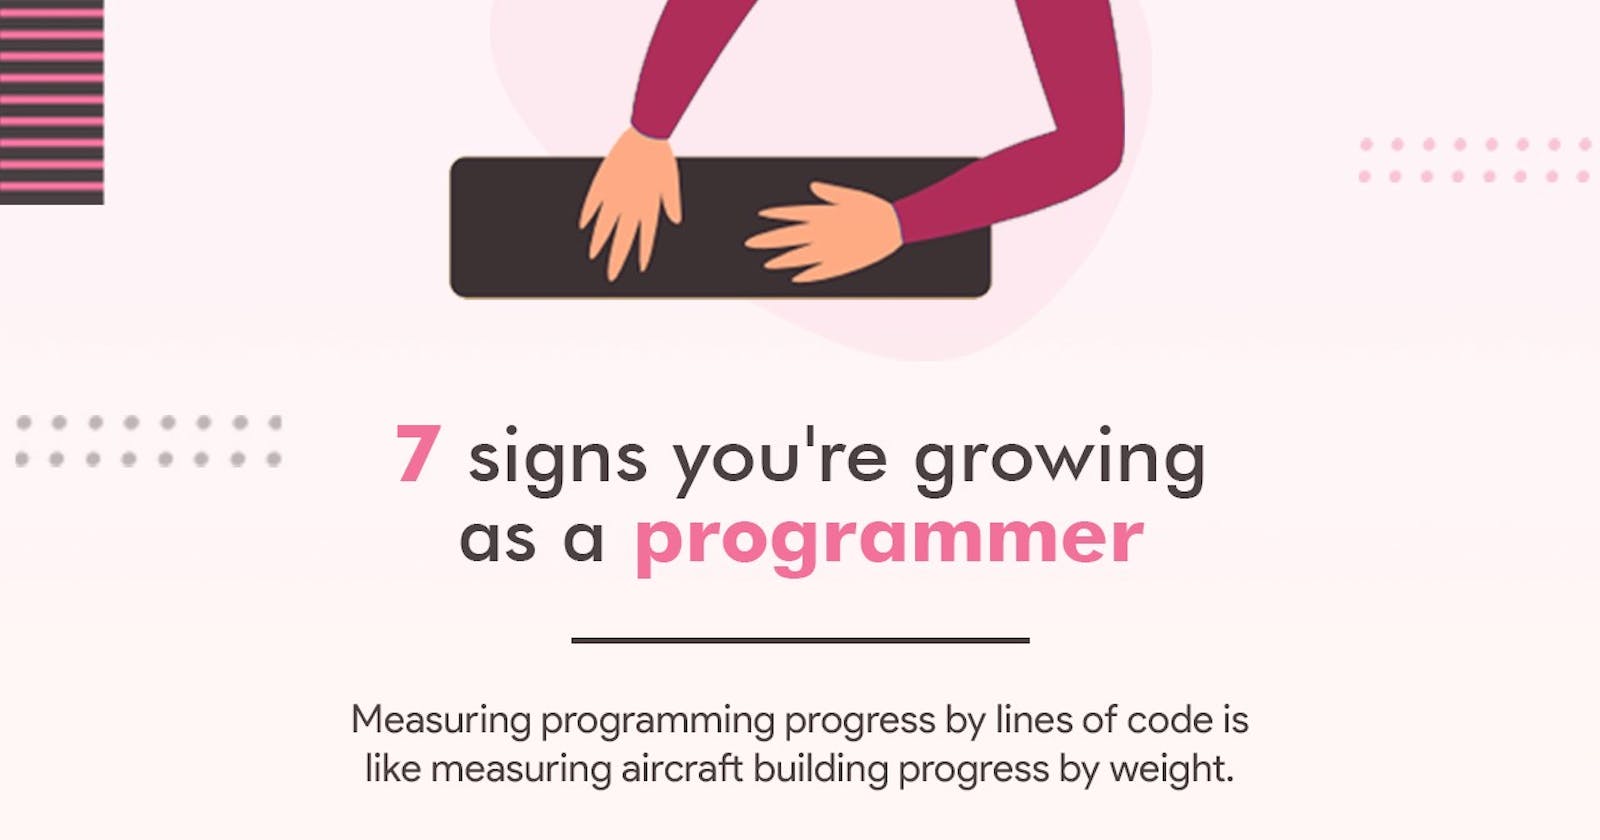 7 signs you’re growing as a programmer